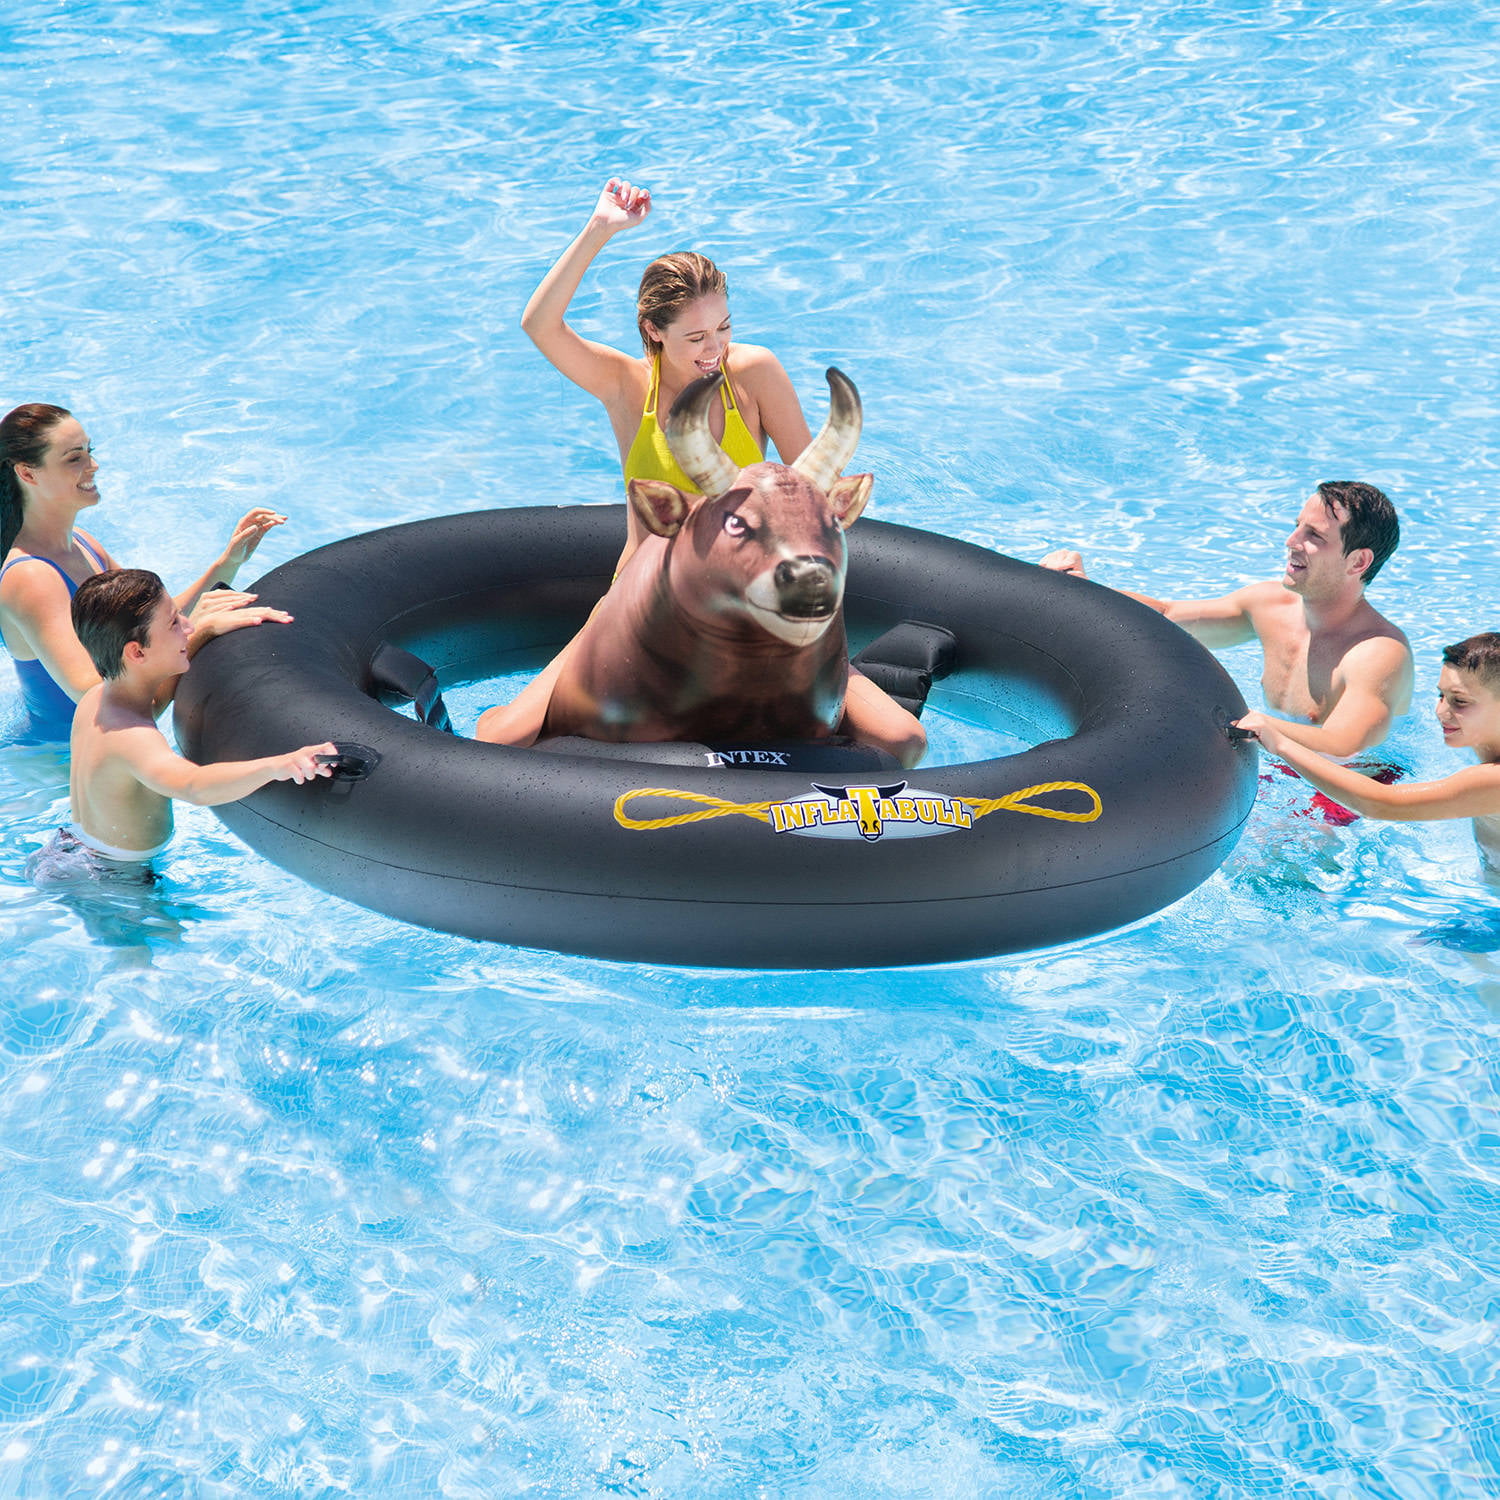 Open Box Details about   Intex PBR Inflatabull Bull-Riding Giant Inflatable Pool Lake Float 